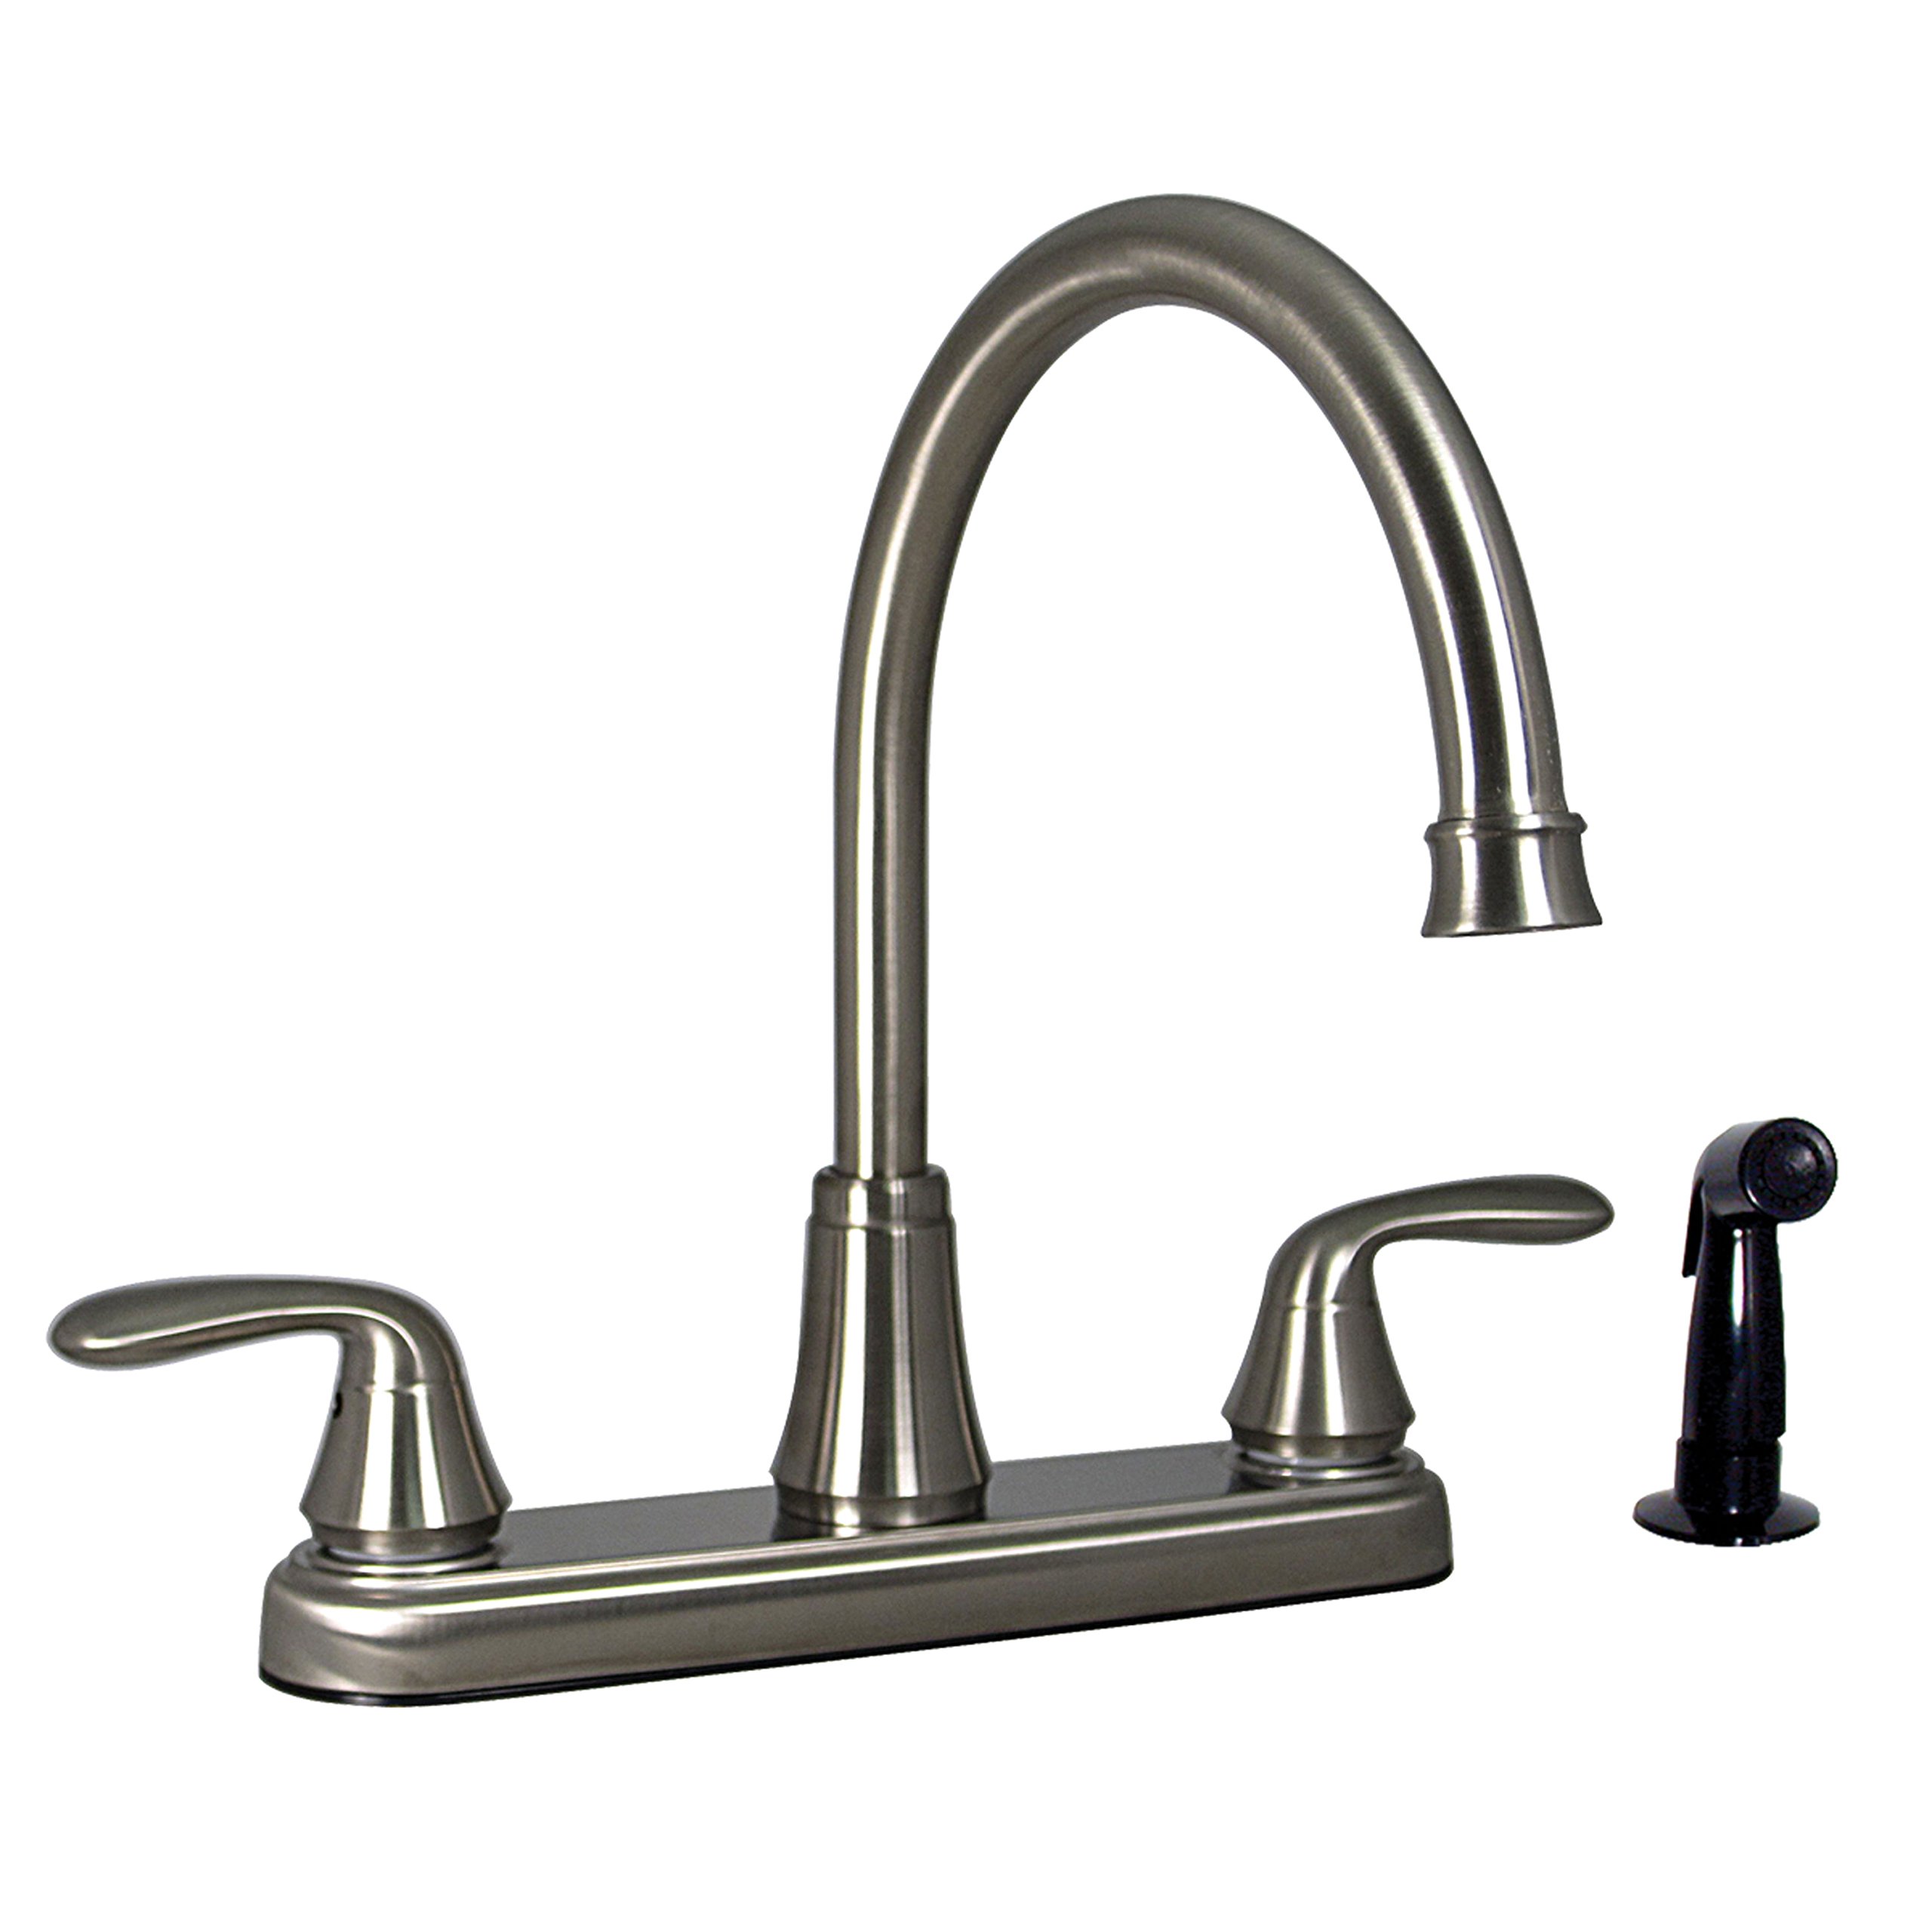 KITCHEN FAUCET W/ SIDE SPRAY 8IN HIARC HYBRID 2 LEVER BRUSHED NICKEL